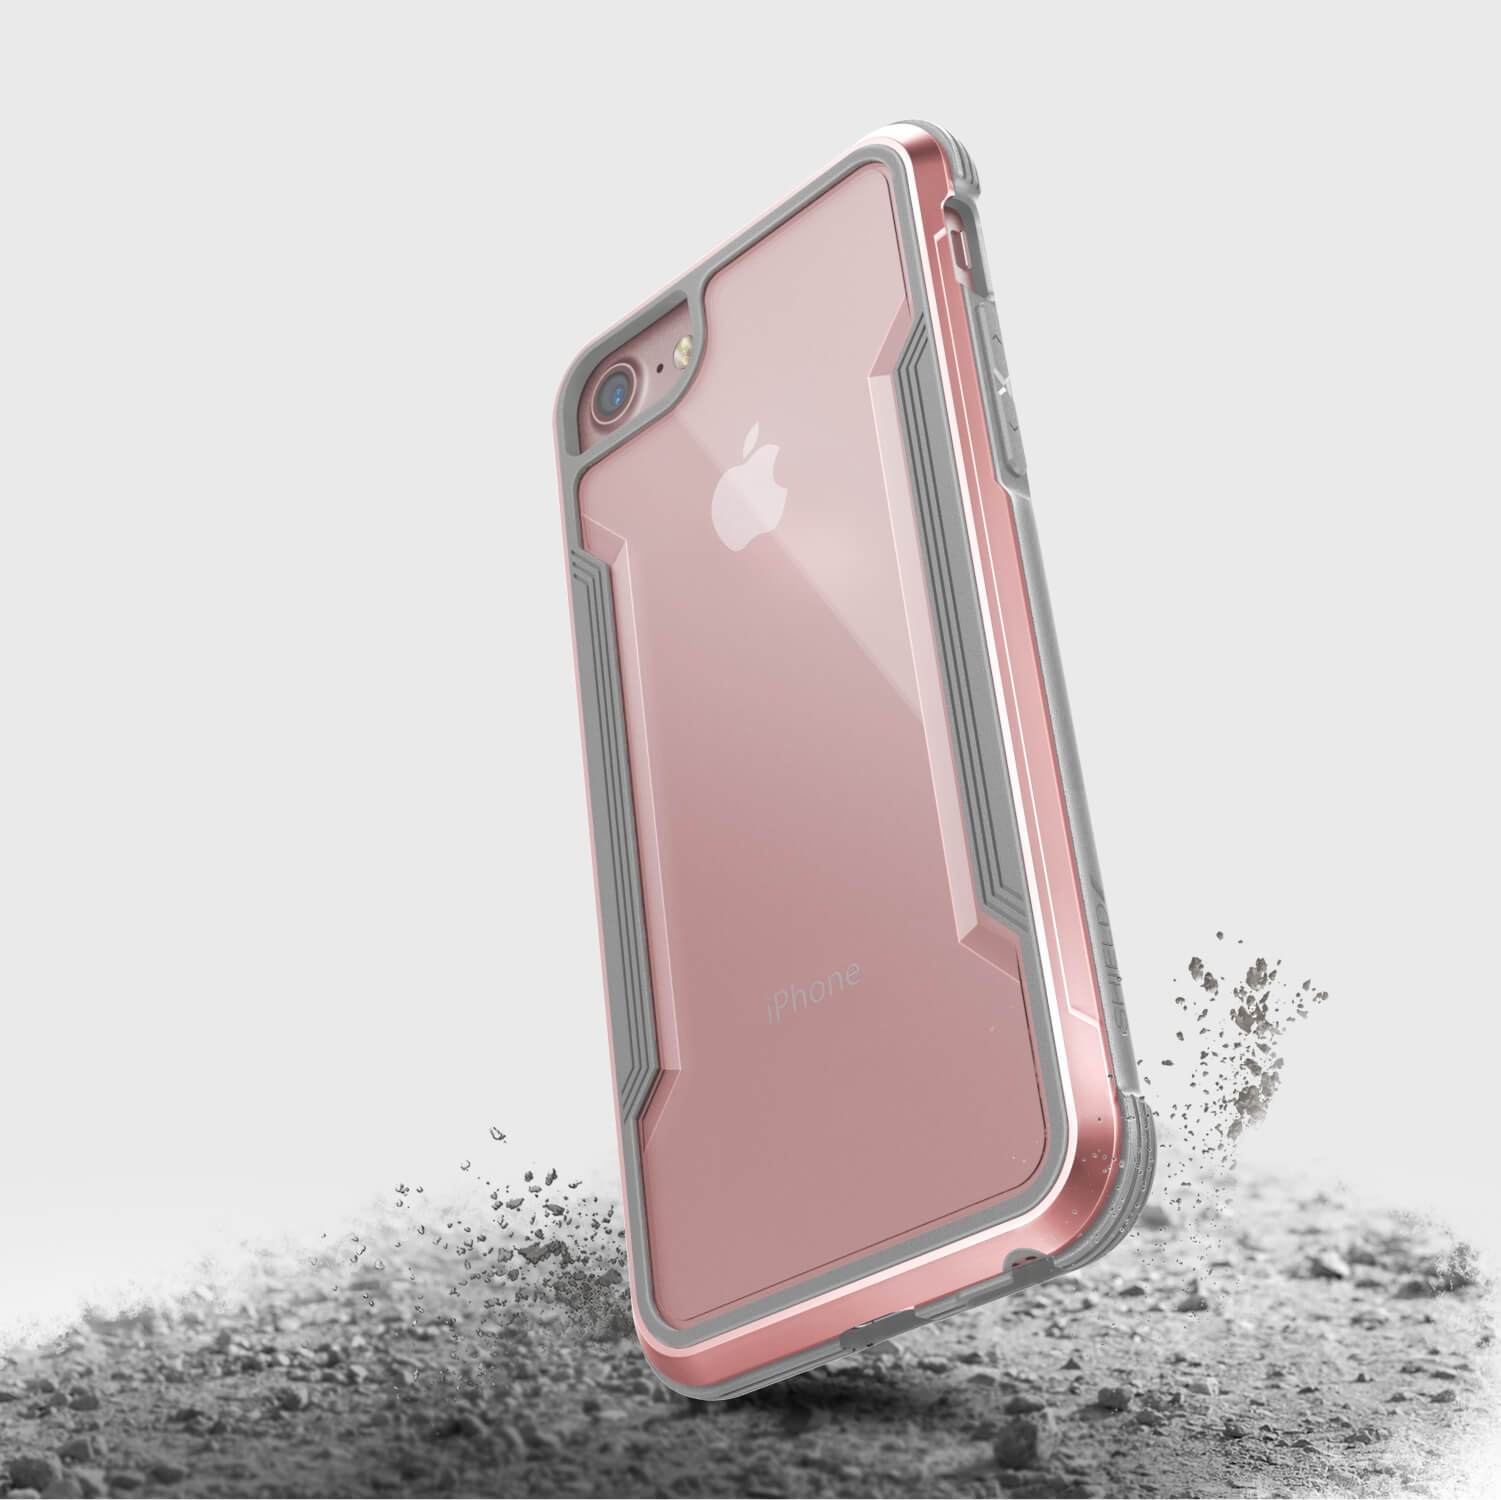 A pink and silver SHIELD iPhone SE/8/7 case from Raptic on the ground.